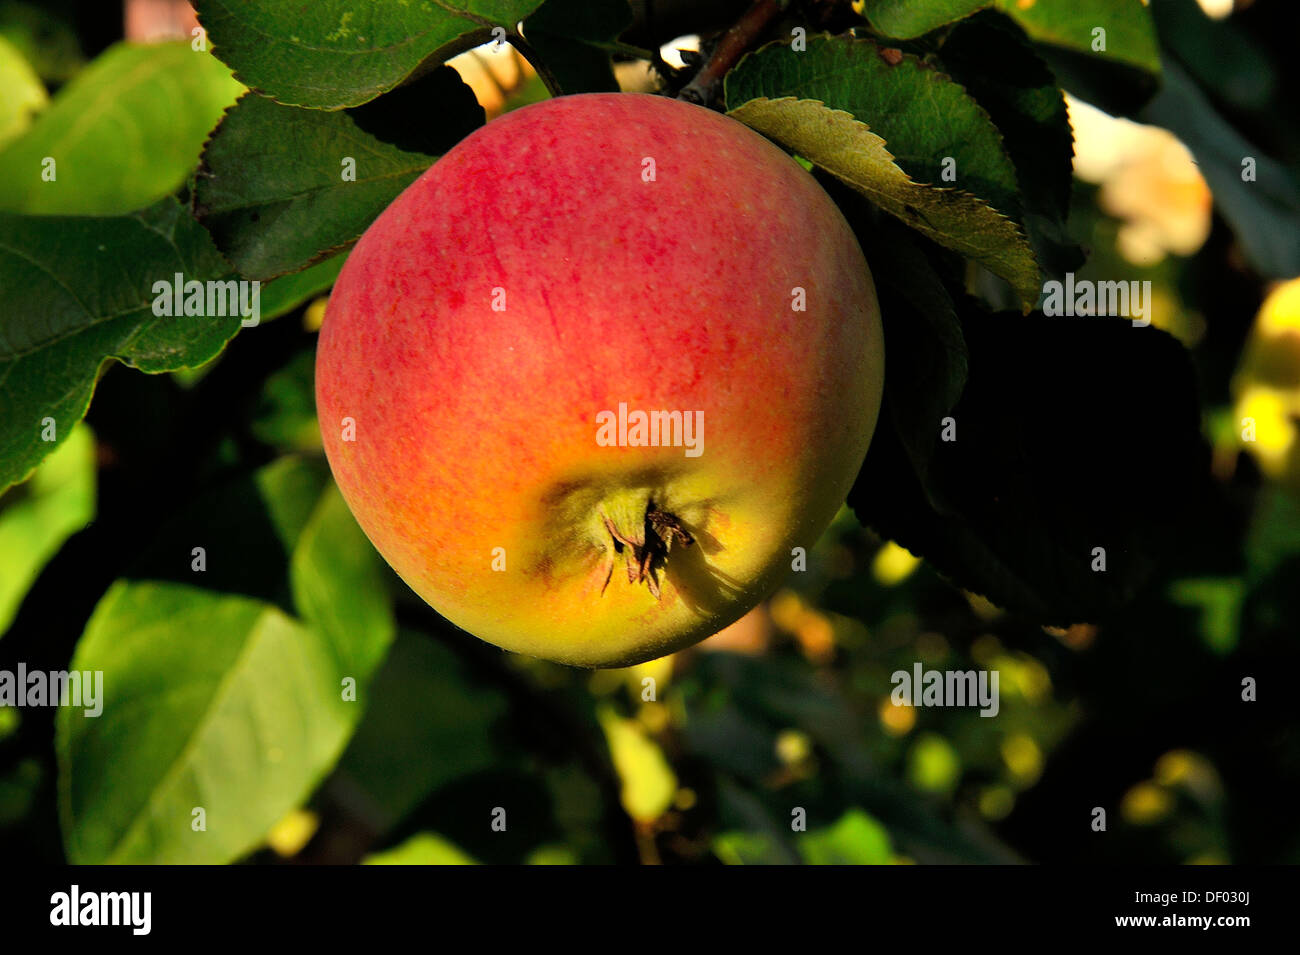 One red apple hanging from an apple tree branch, Stock Photo